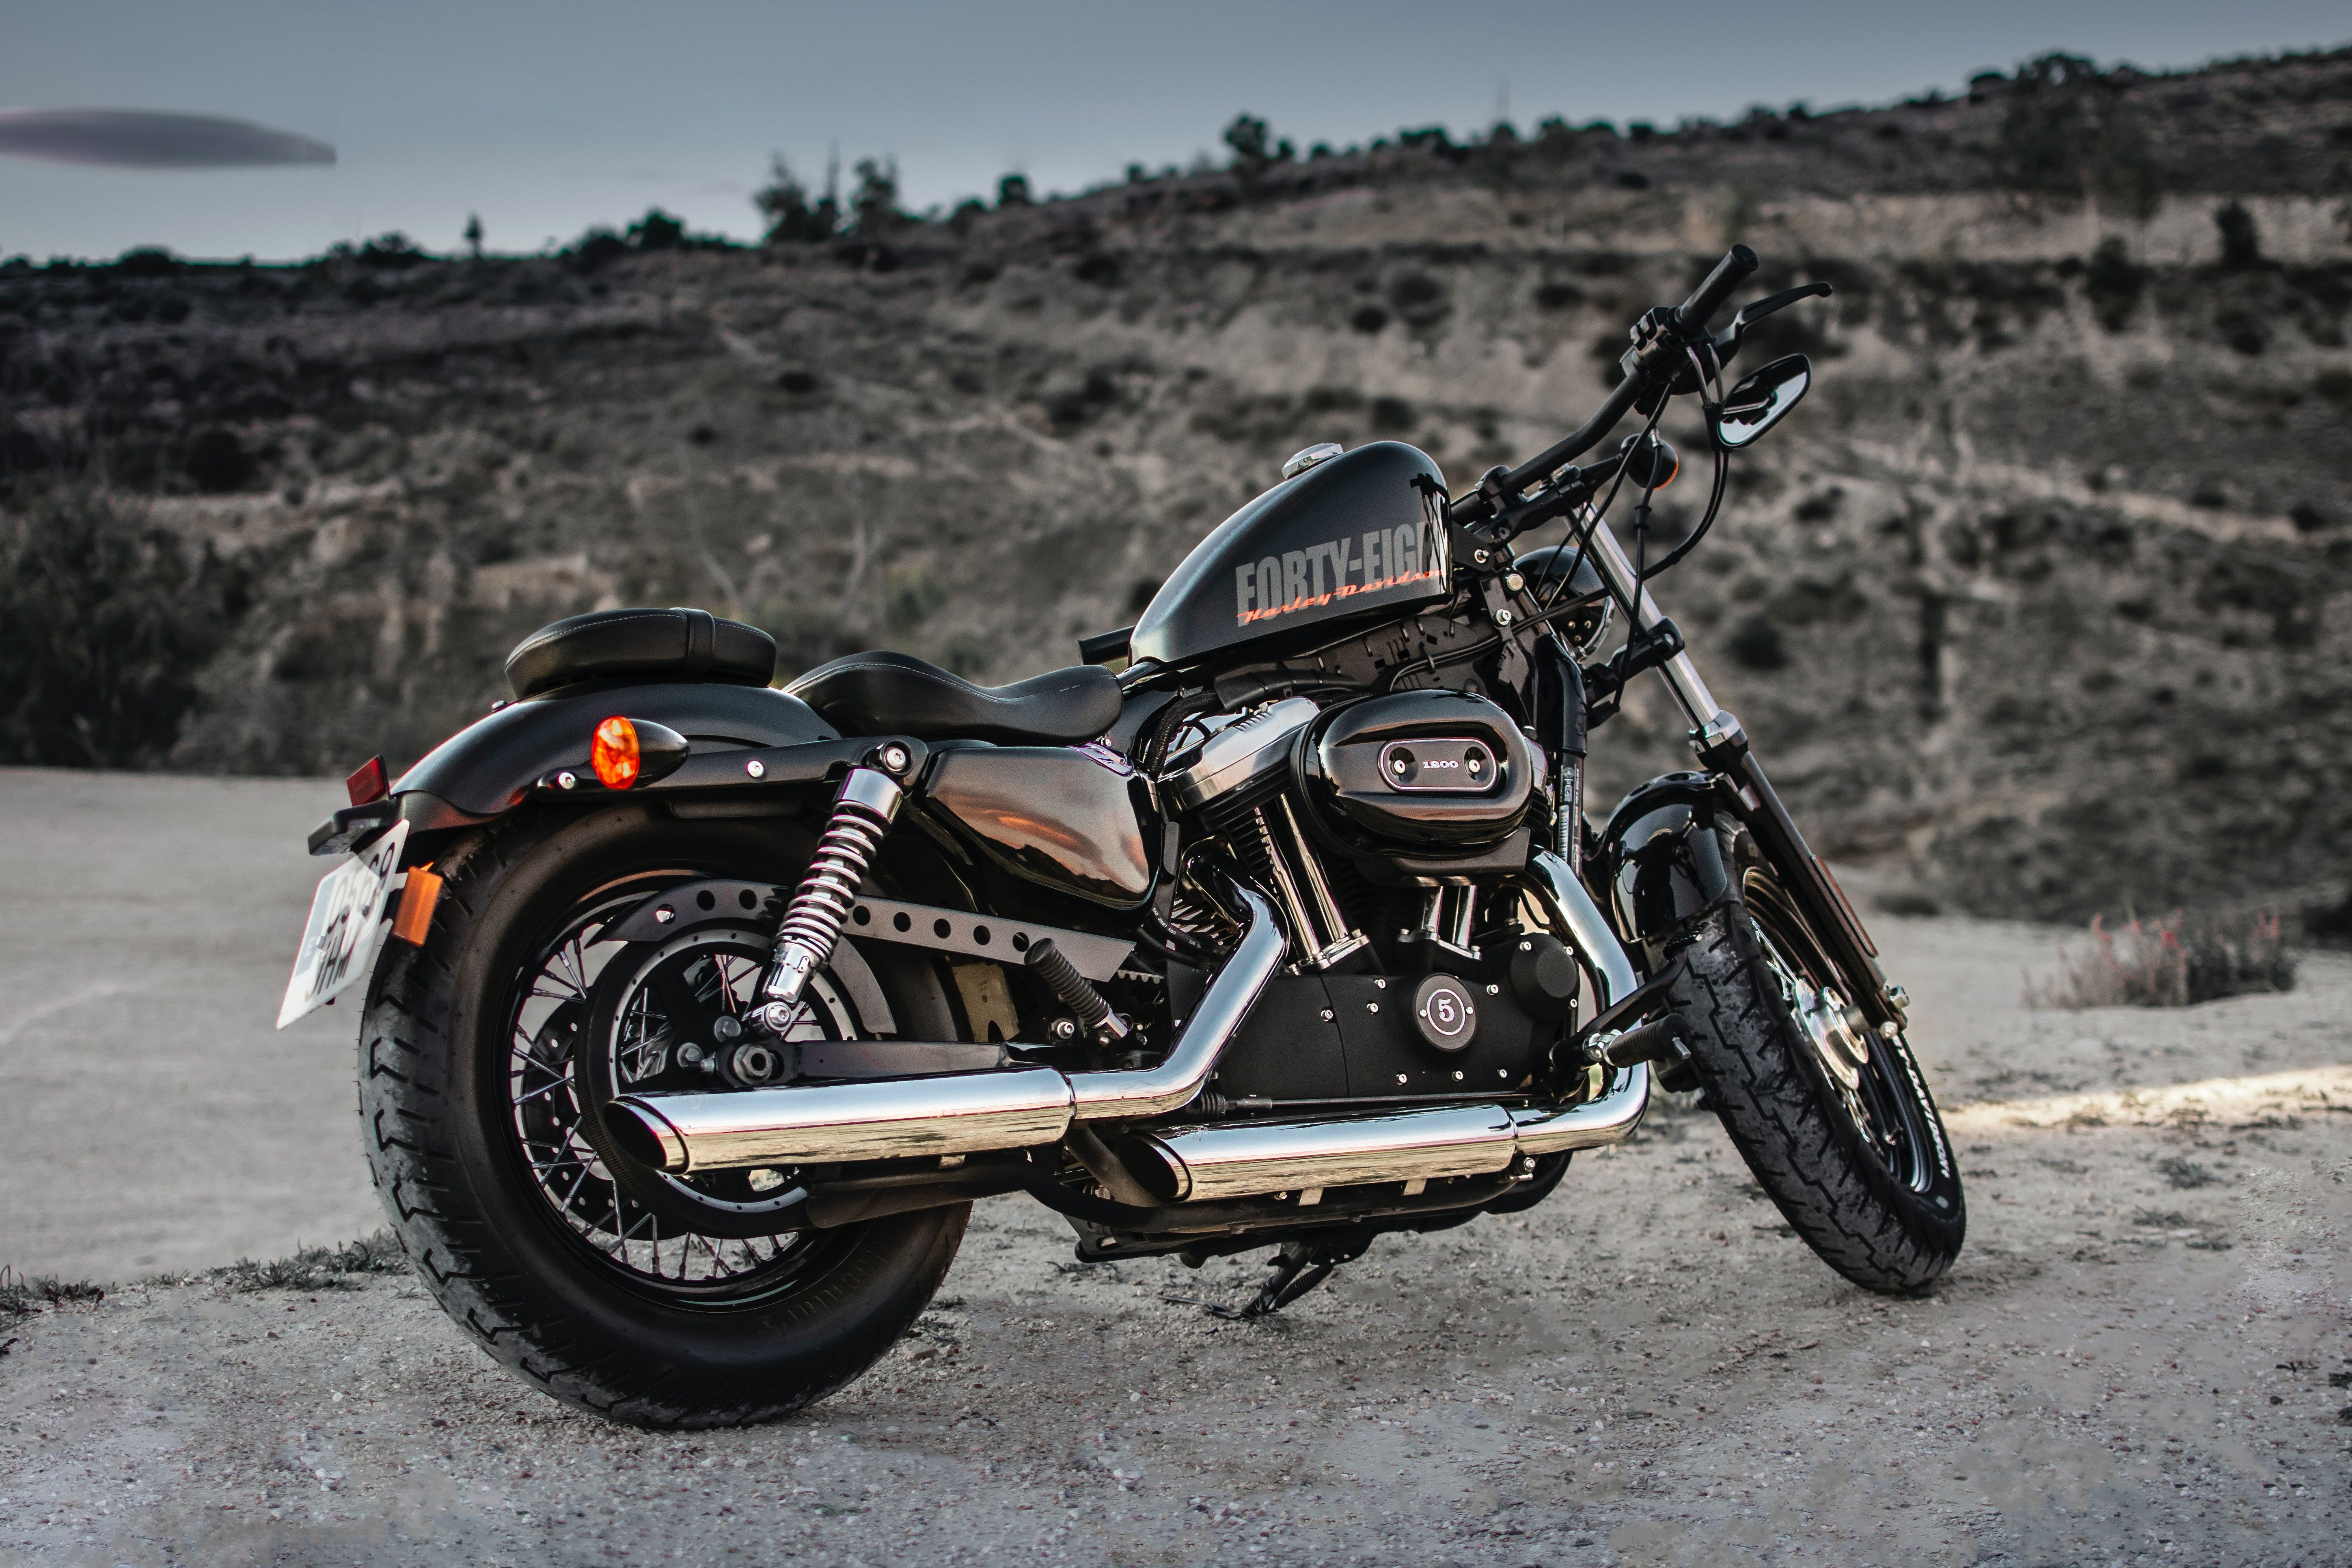 10 Beautiful Bobber Motorcycles For Those Vintage Vibes